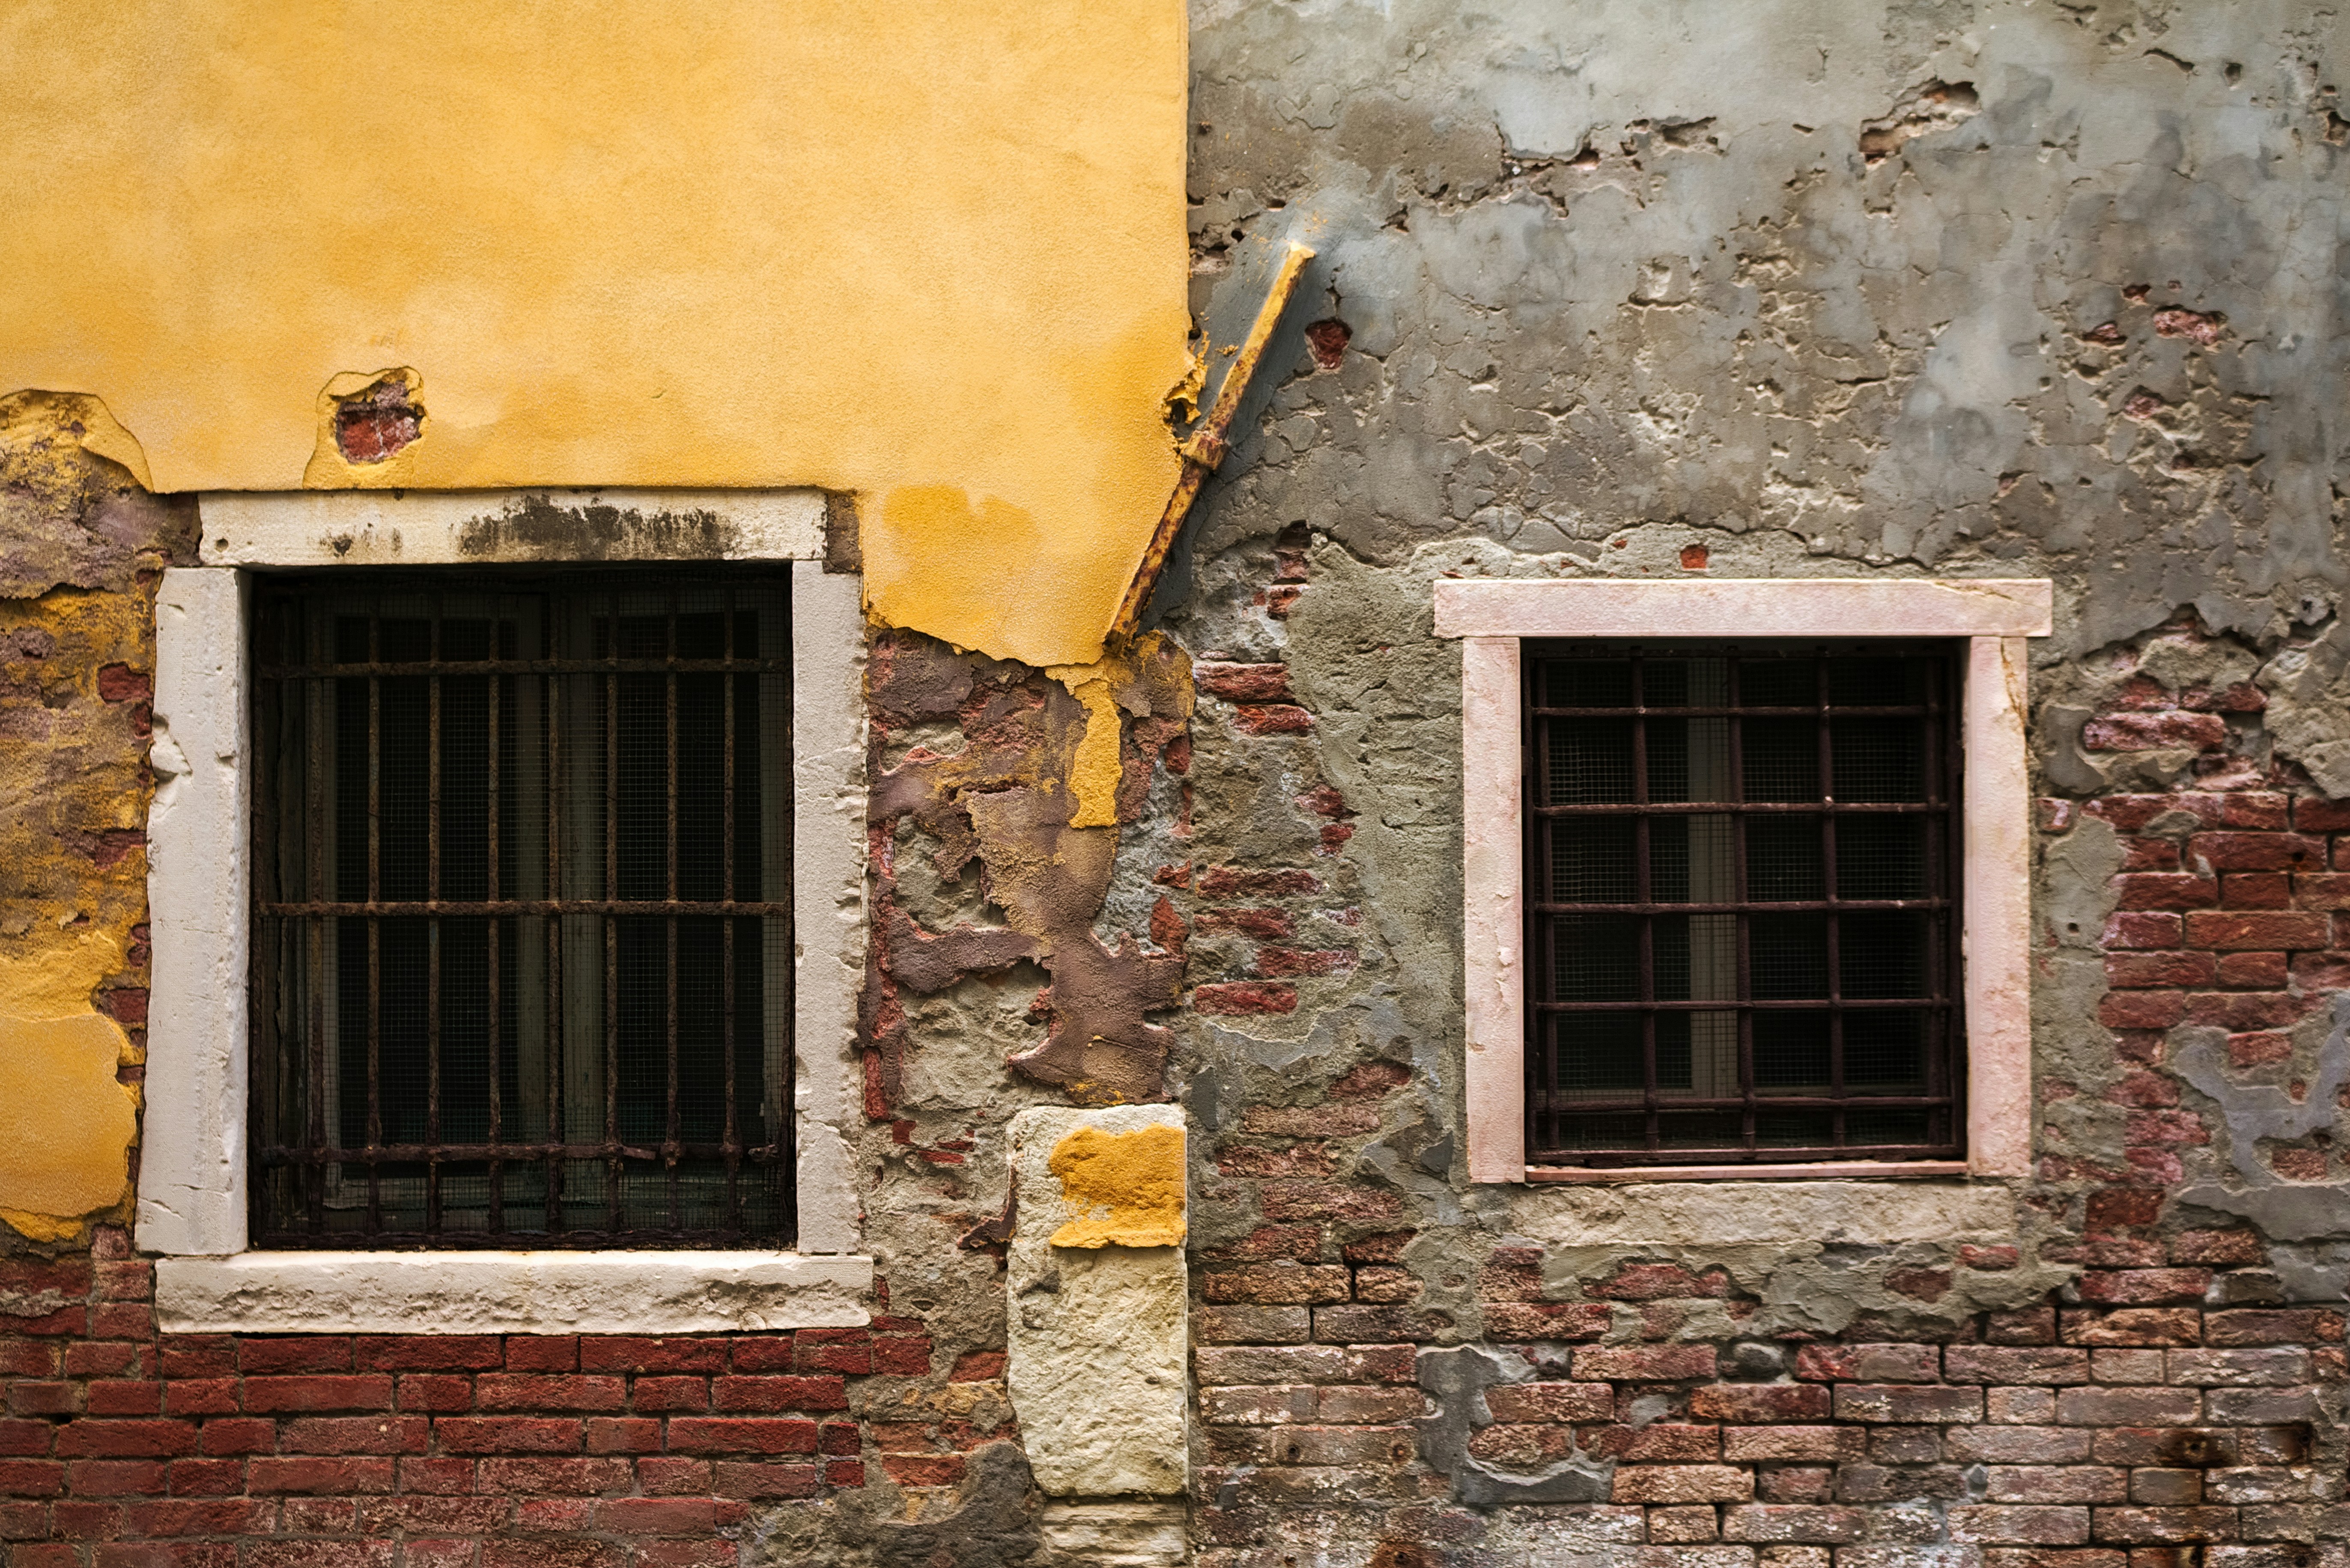 Choose from a curated selection of Italy photos. Always free on Unsplash.